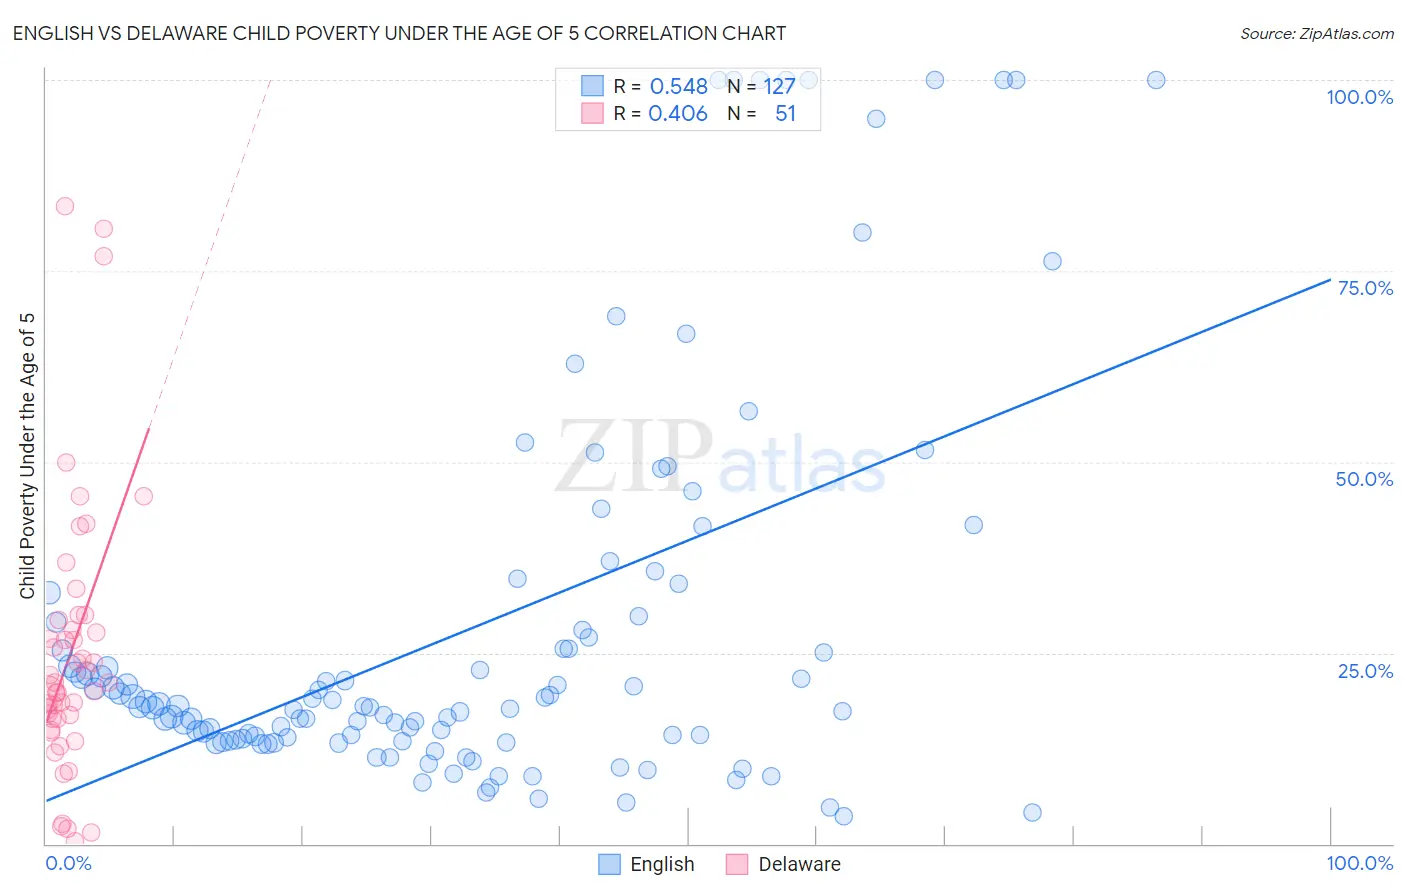 English vs Delaware Child Poverty Under the Age of 5